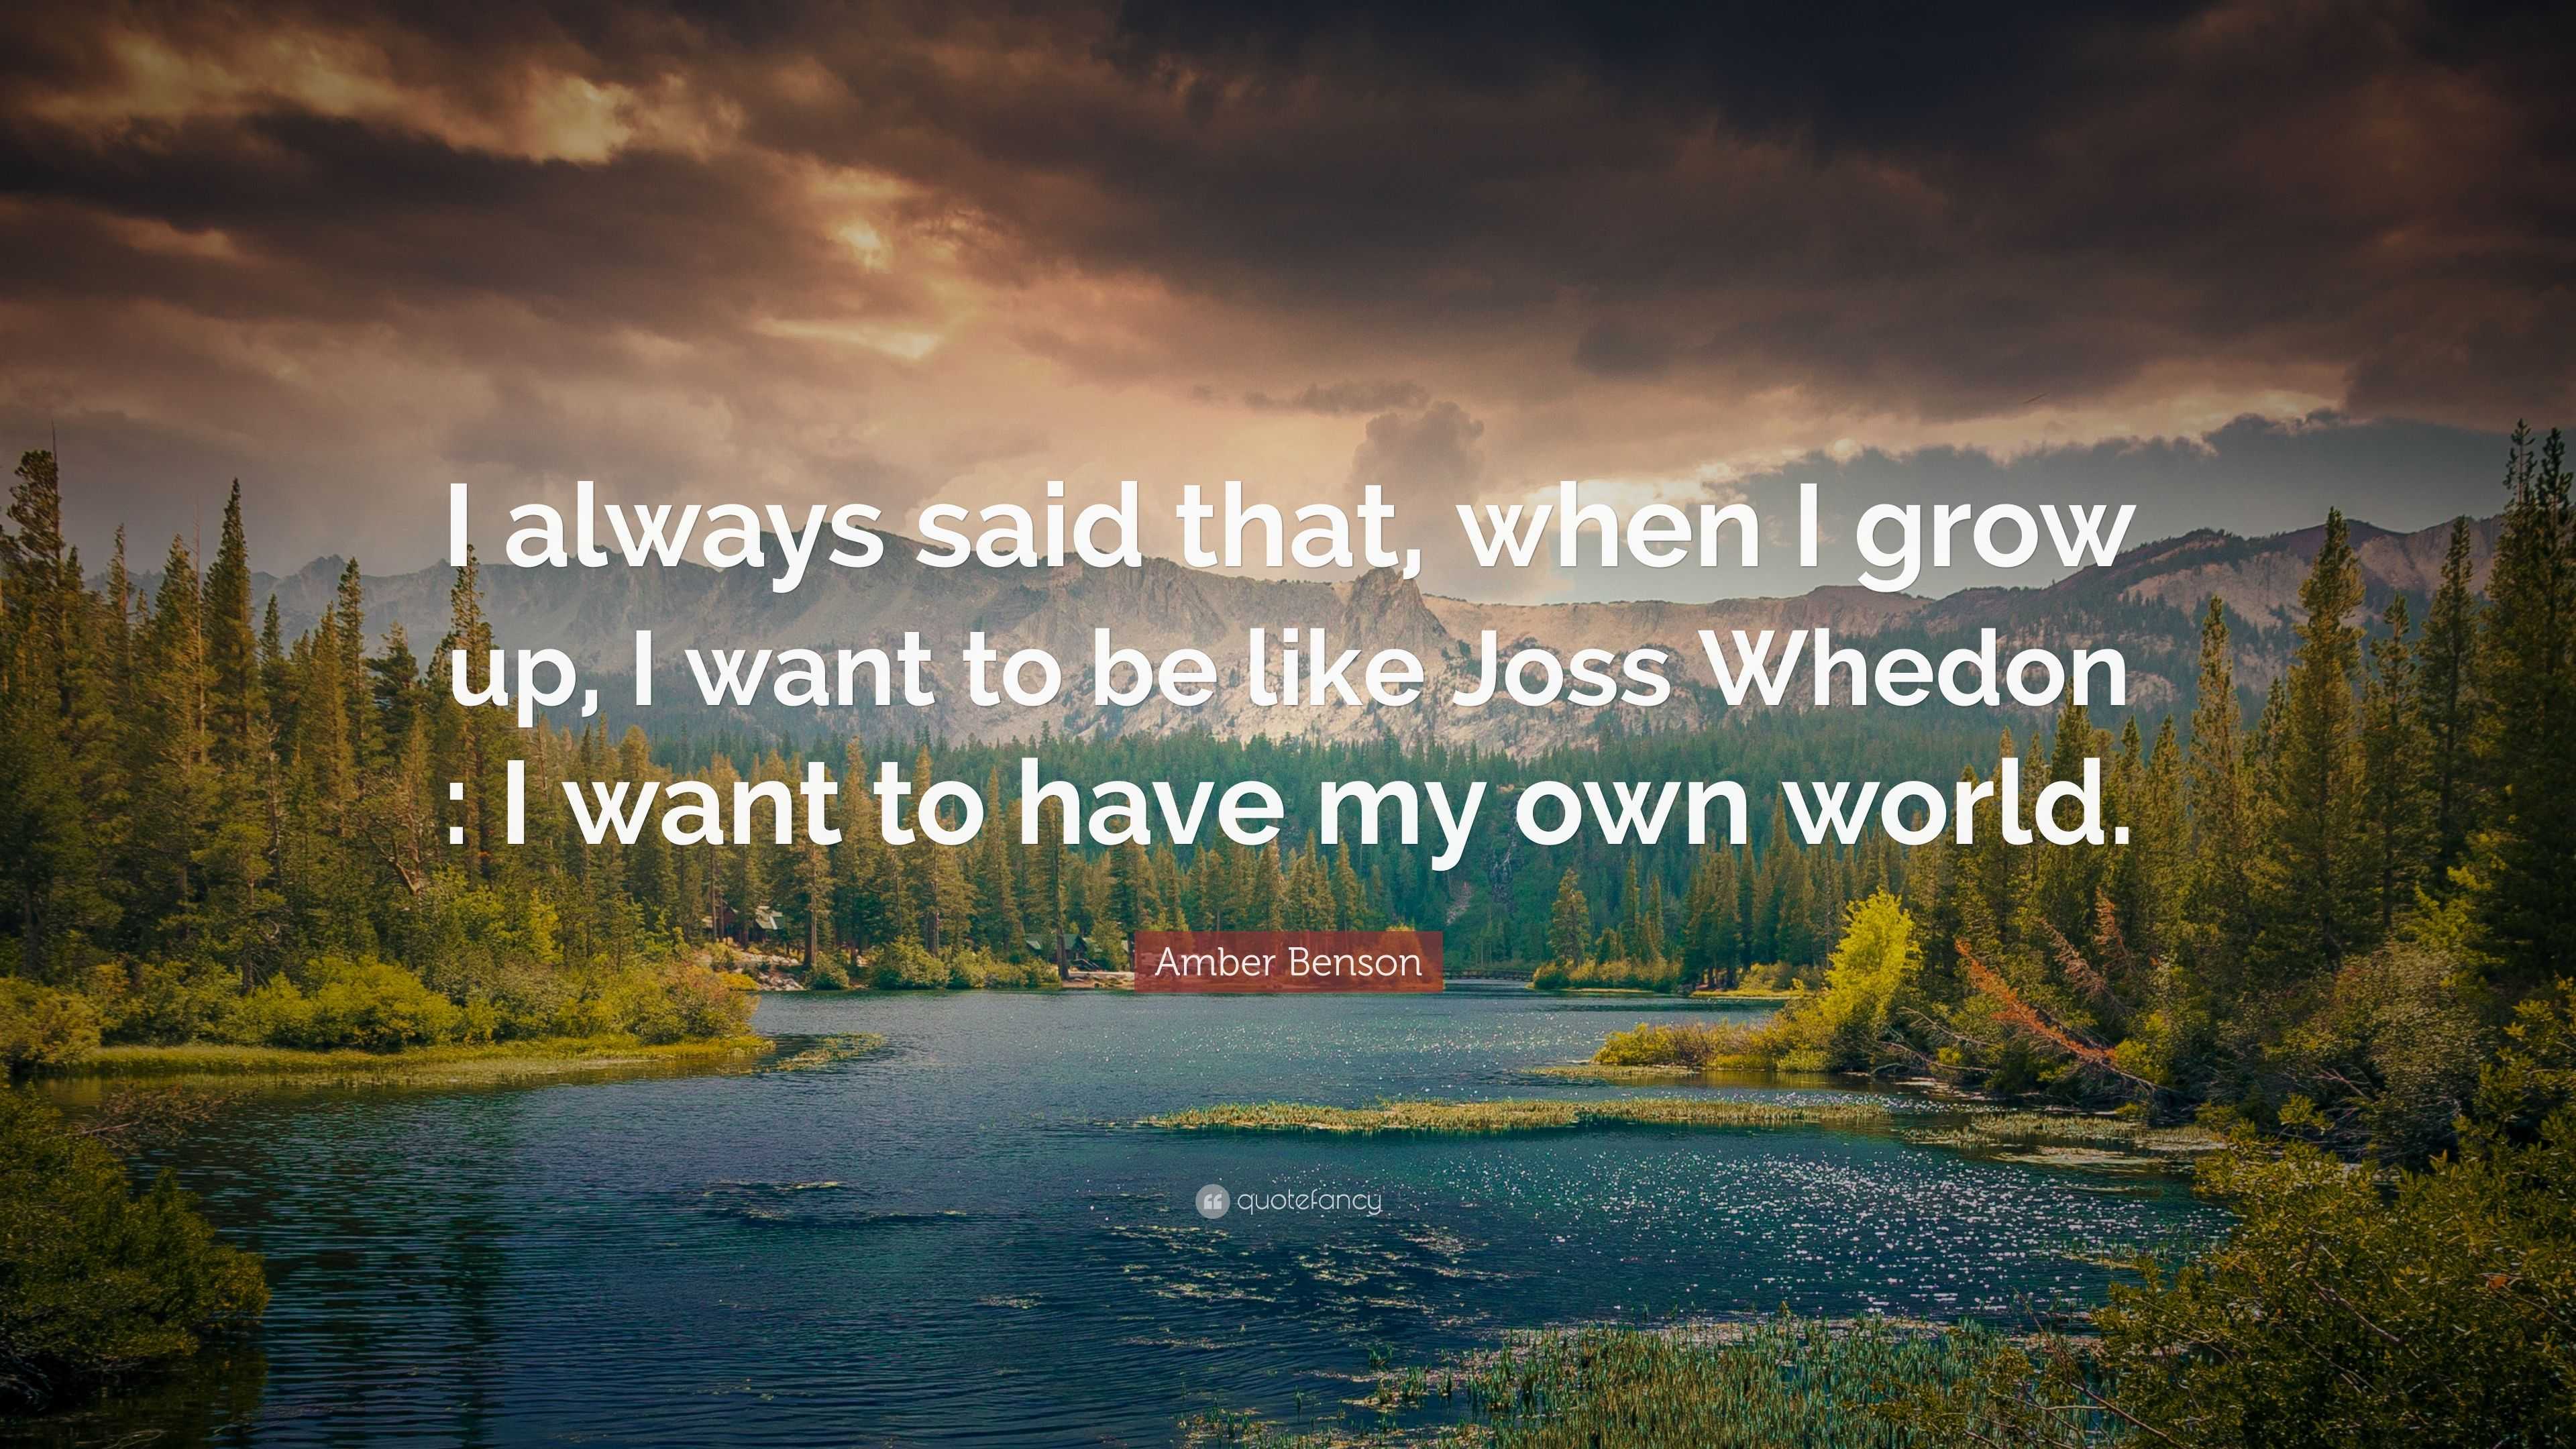 Amber Benson Quote “i Always Said That When I Grow Up I Want To Be Like Joss Whedon I Want